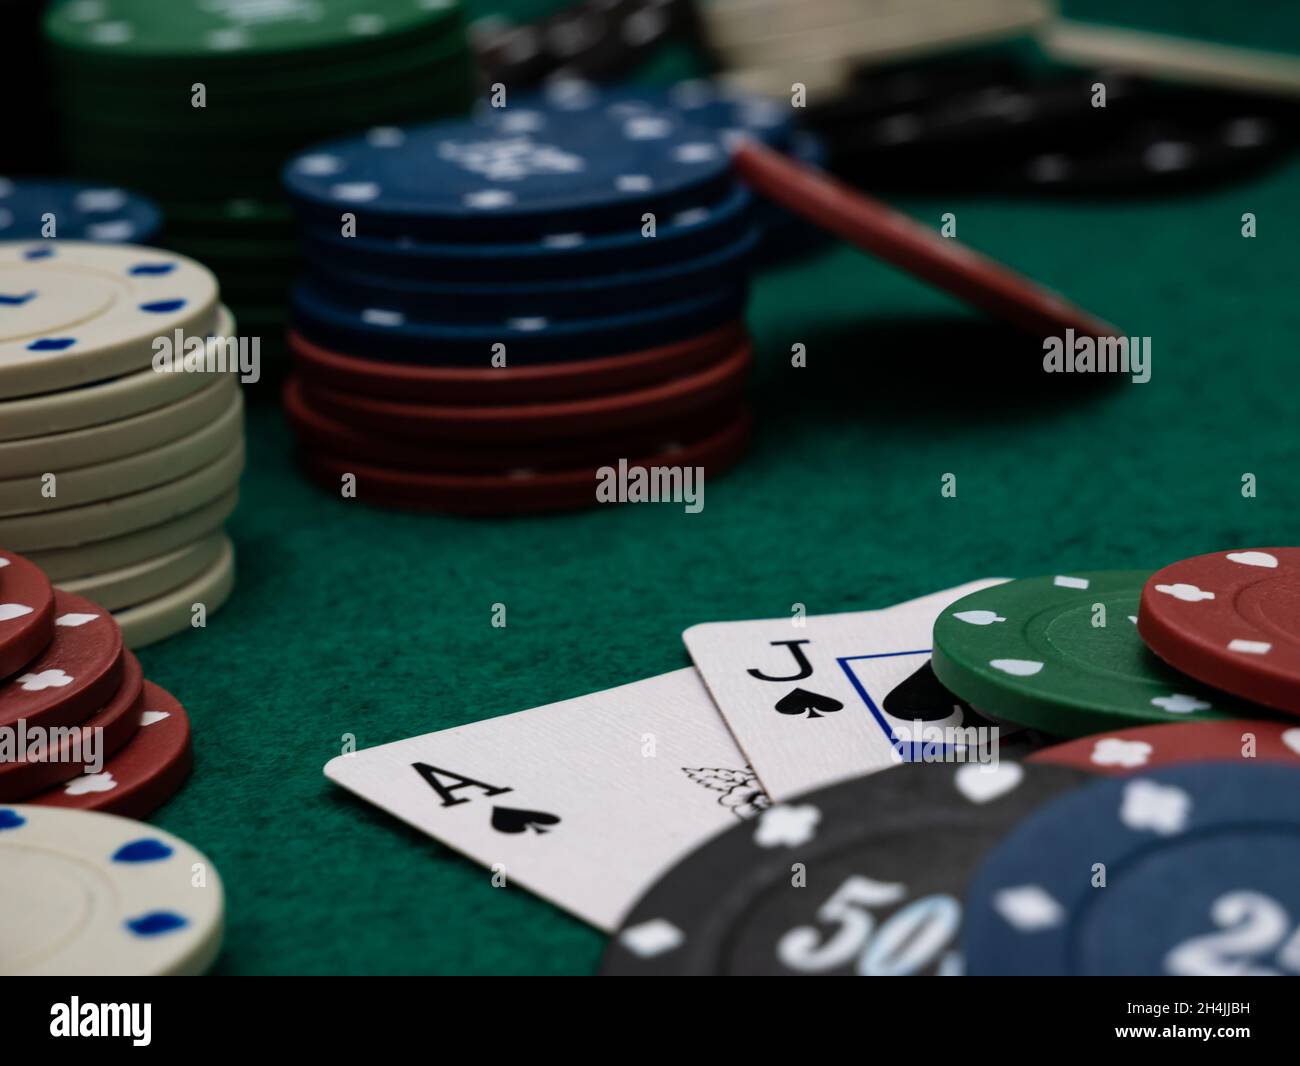 poker game table, ace and jack blackjack score with stack of playing chips on the green table Stock Photo